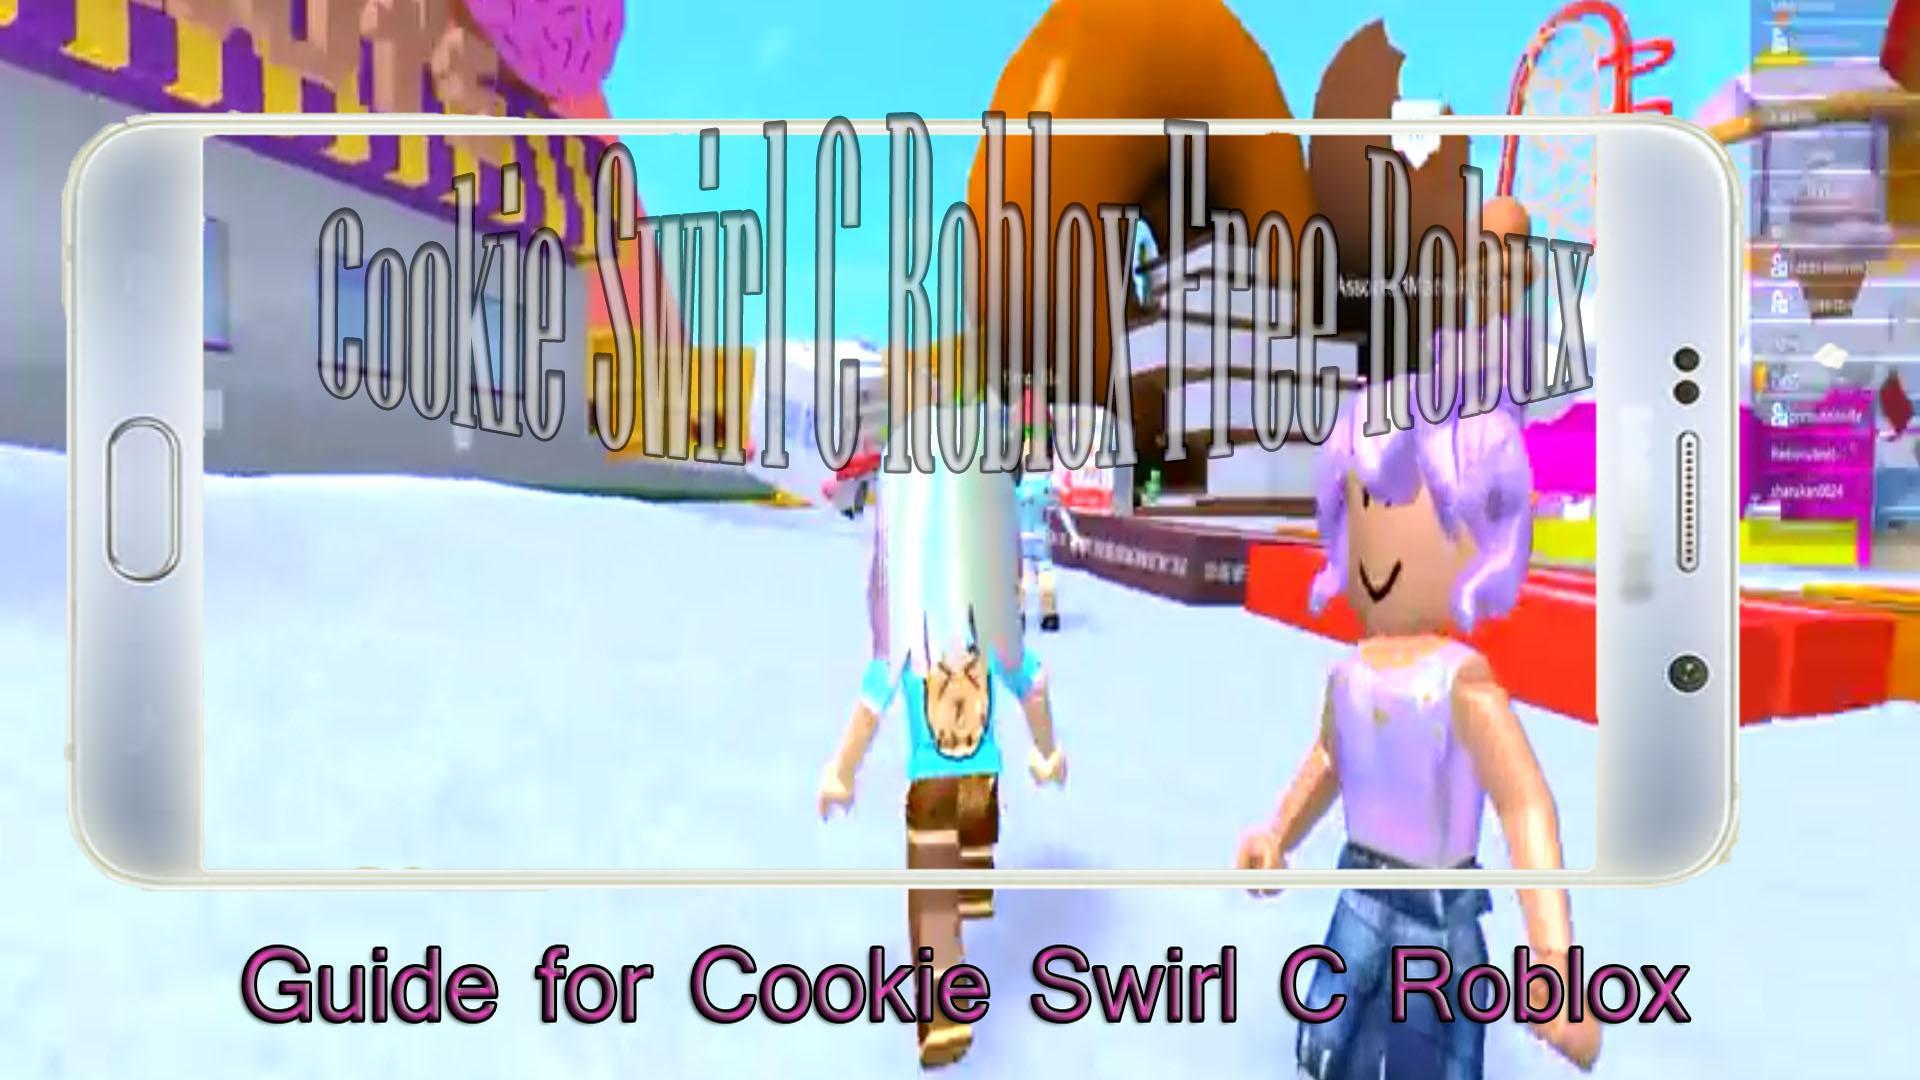 Robux Free Tips Cookie Swirl C Roblox For Android Apk Download - tips cookie swirl c roblox working at mcdonalds for android